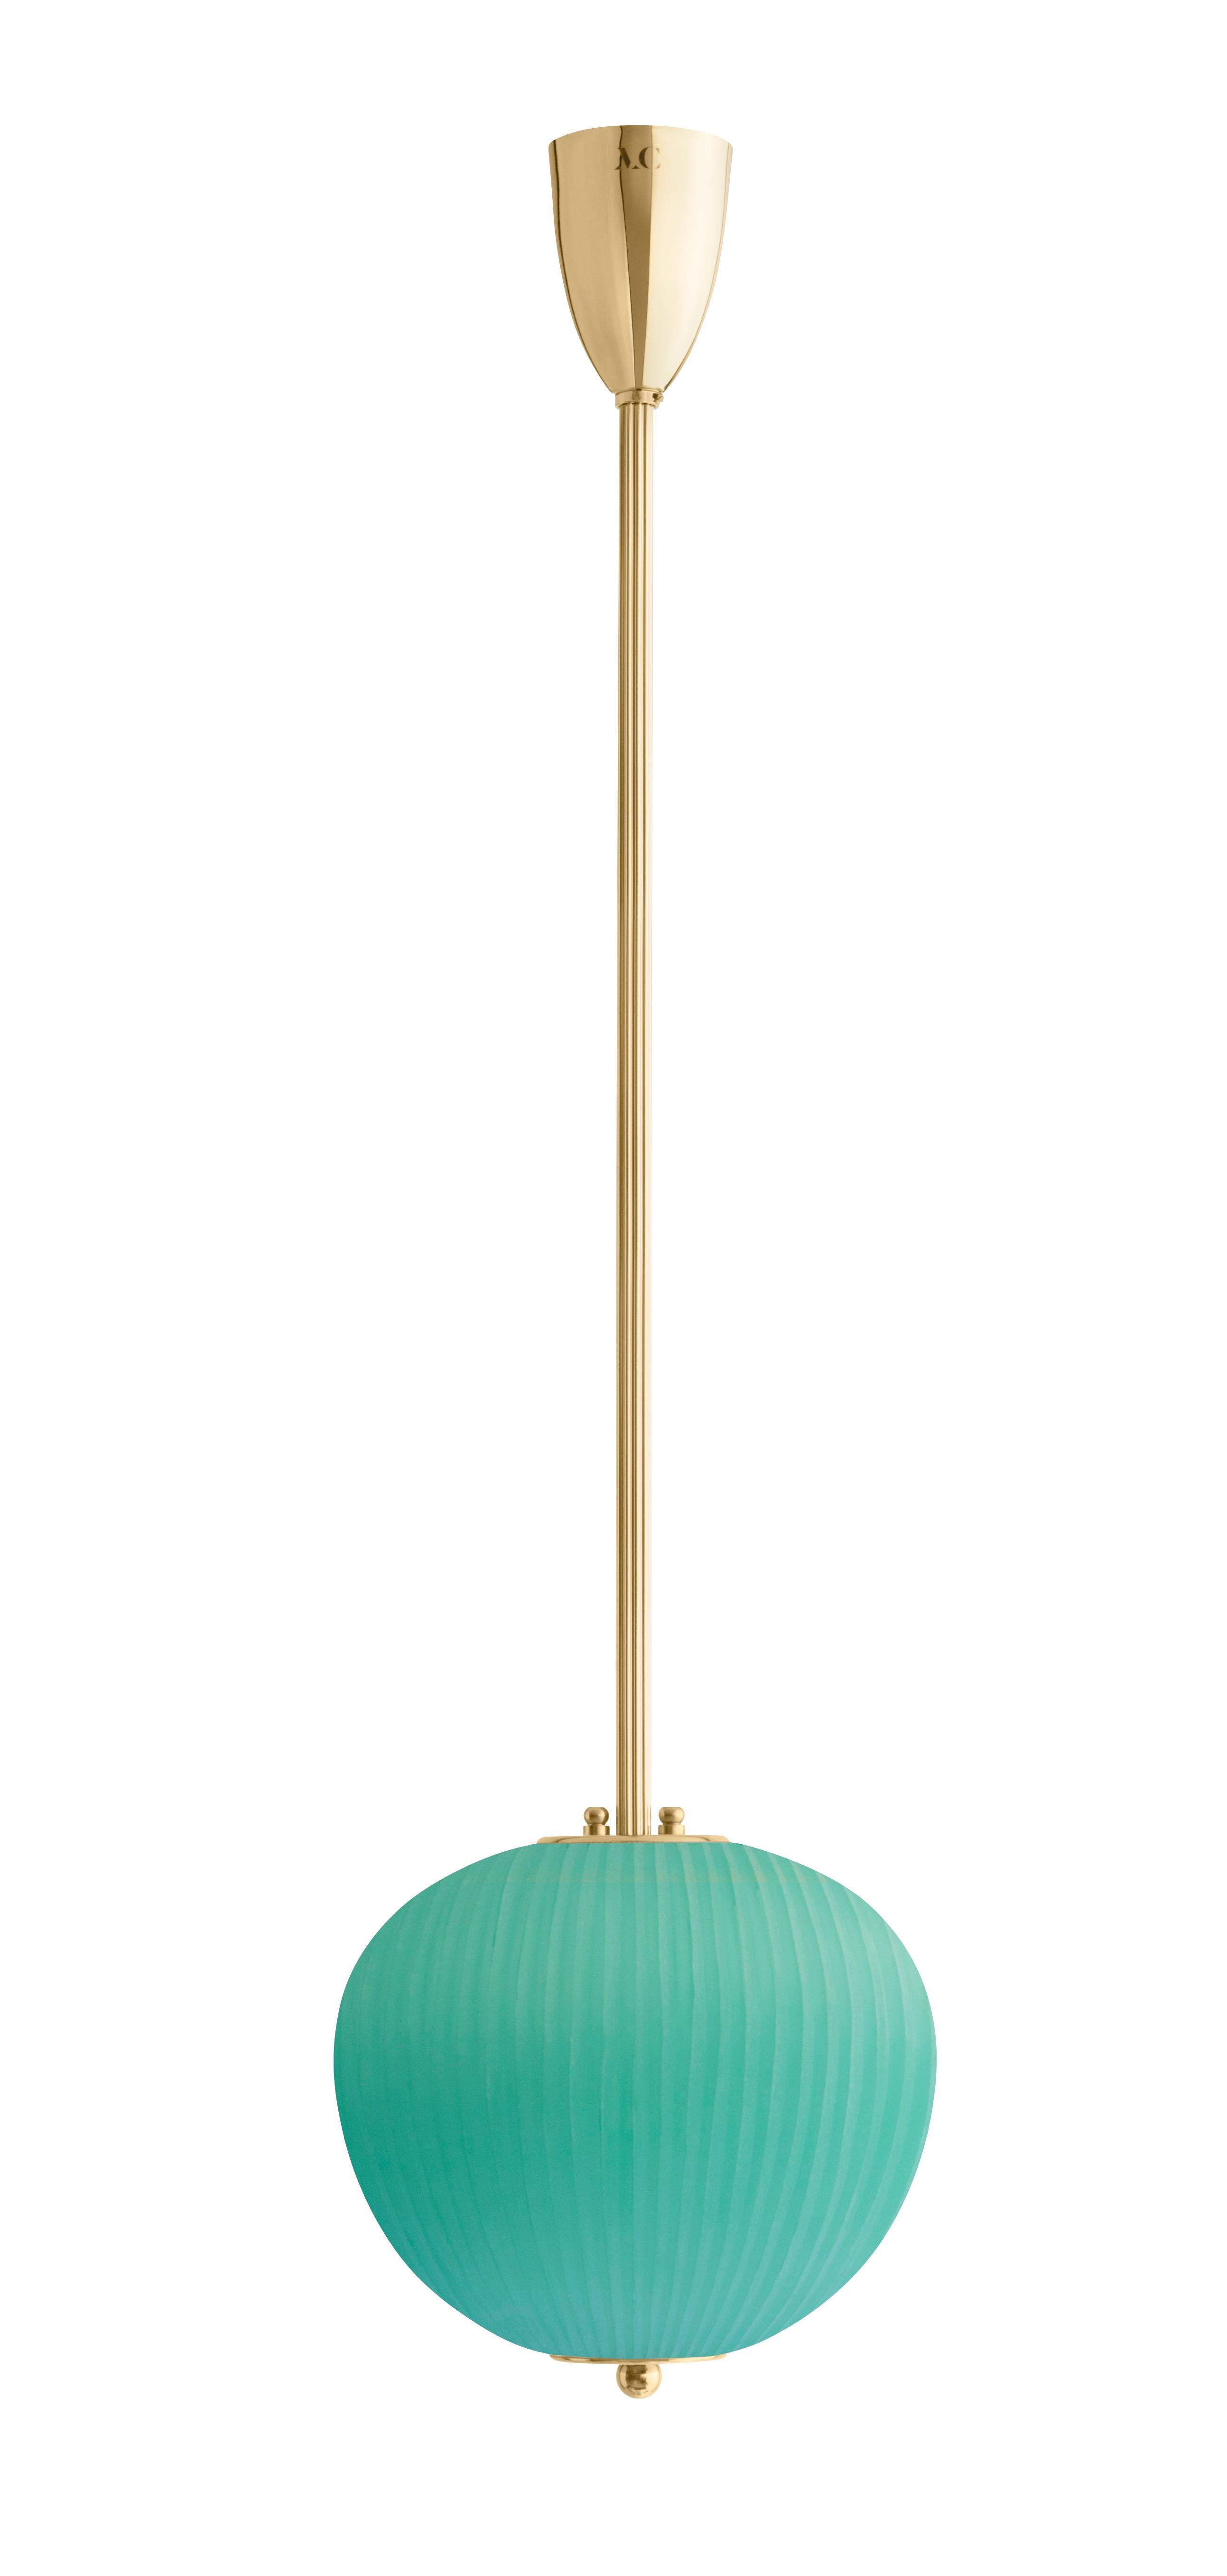 Pendant China 03 by Magic Circus Editions
Dimensions: H 90 x W 26.2 x D 26.2 cm, also available in H 110, 130, 150, 175, 190
Materials: Brass, mouth blown glass sculpted with a diamond saw
Colour: jade green

Available finishes: Brass,